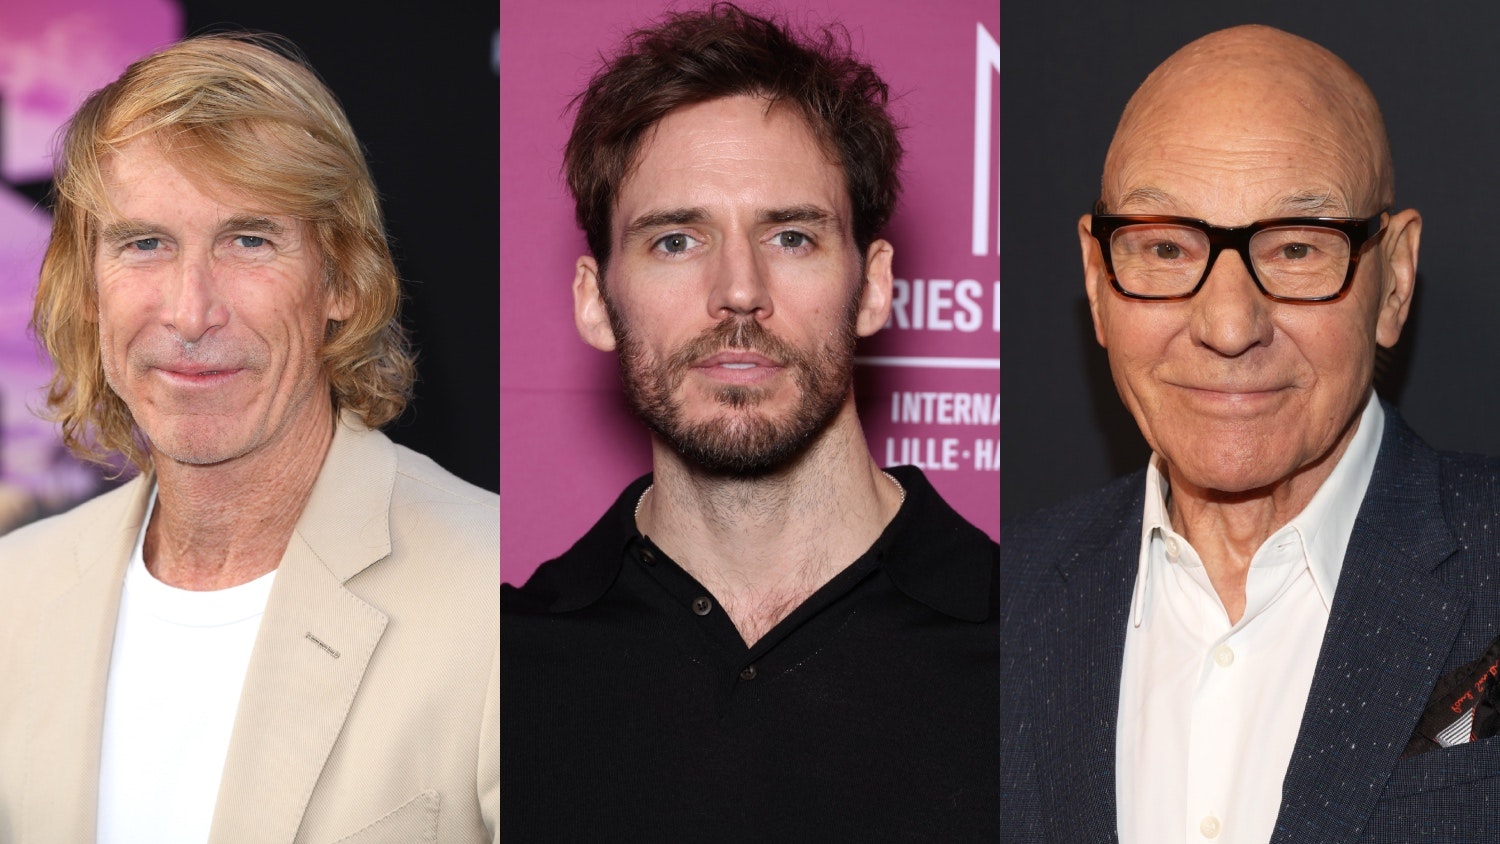 Michael Bay talks about directing the Netflix series “Barbaric” with Sam Claflin and Patrick Stewart